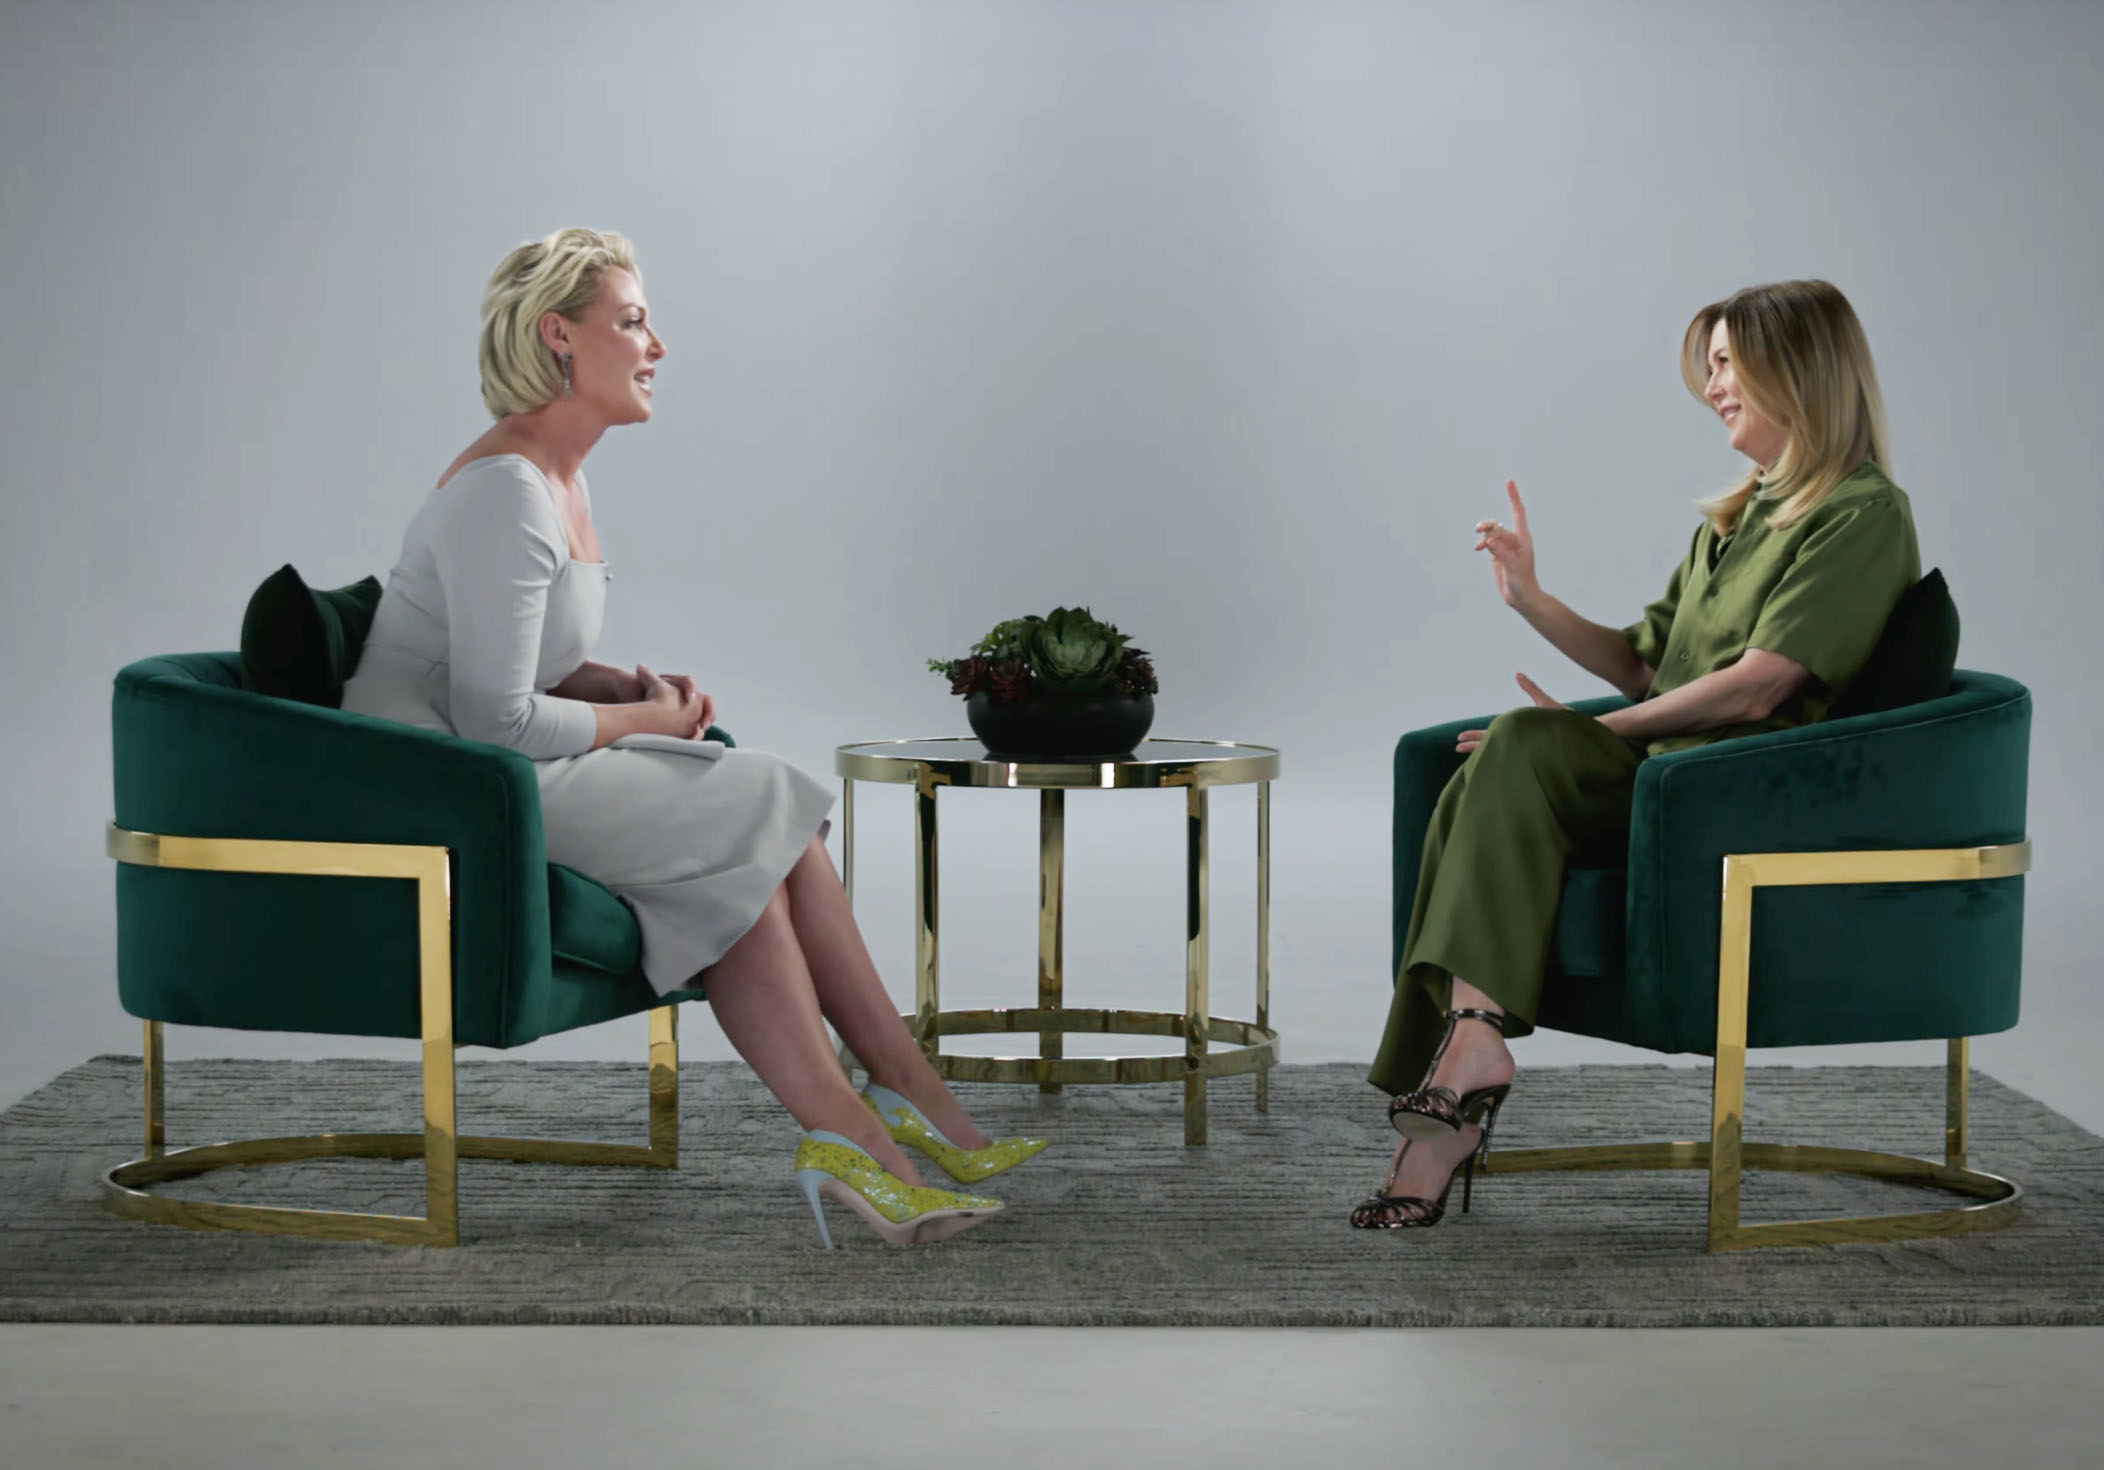 Katherine Heigl and Ellen Pompeo interviewing each other